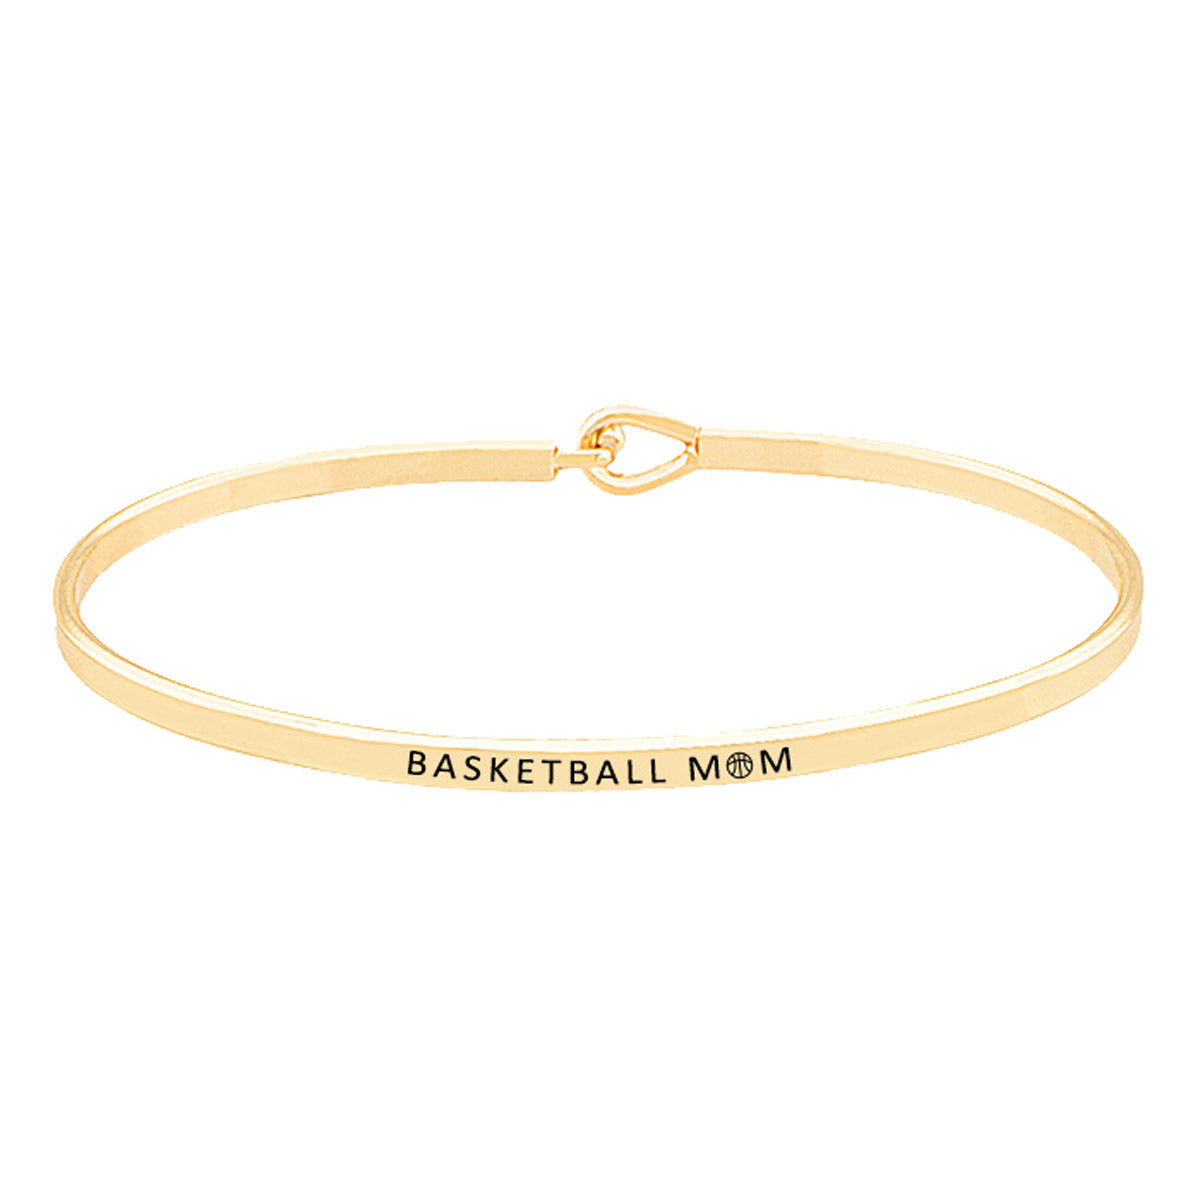 "Basketball Mom" Brass Thin Metal Hook Bracelet Thin Basketball Mom Hook Bracelet, wear with your favorite tops & dresses all year round! Thank mom for supporting you at your basketball games, let her know how much she is loved and appreciated. Great Birthday Gift, Mother's Day Gift, Just Because Gift, Thank you Gift 